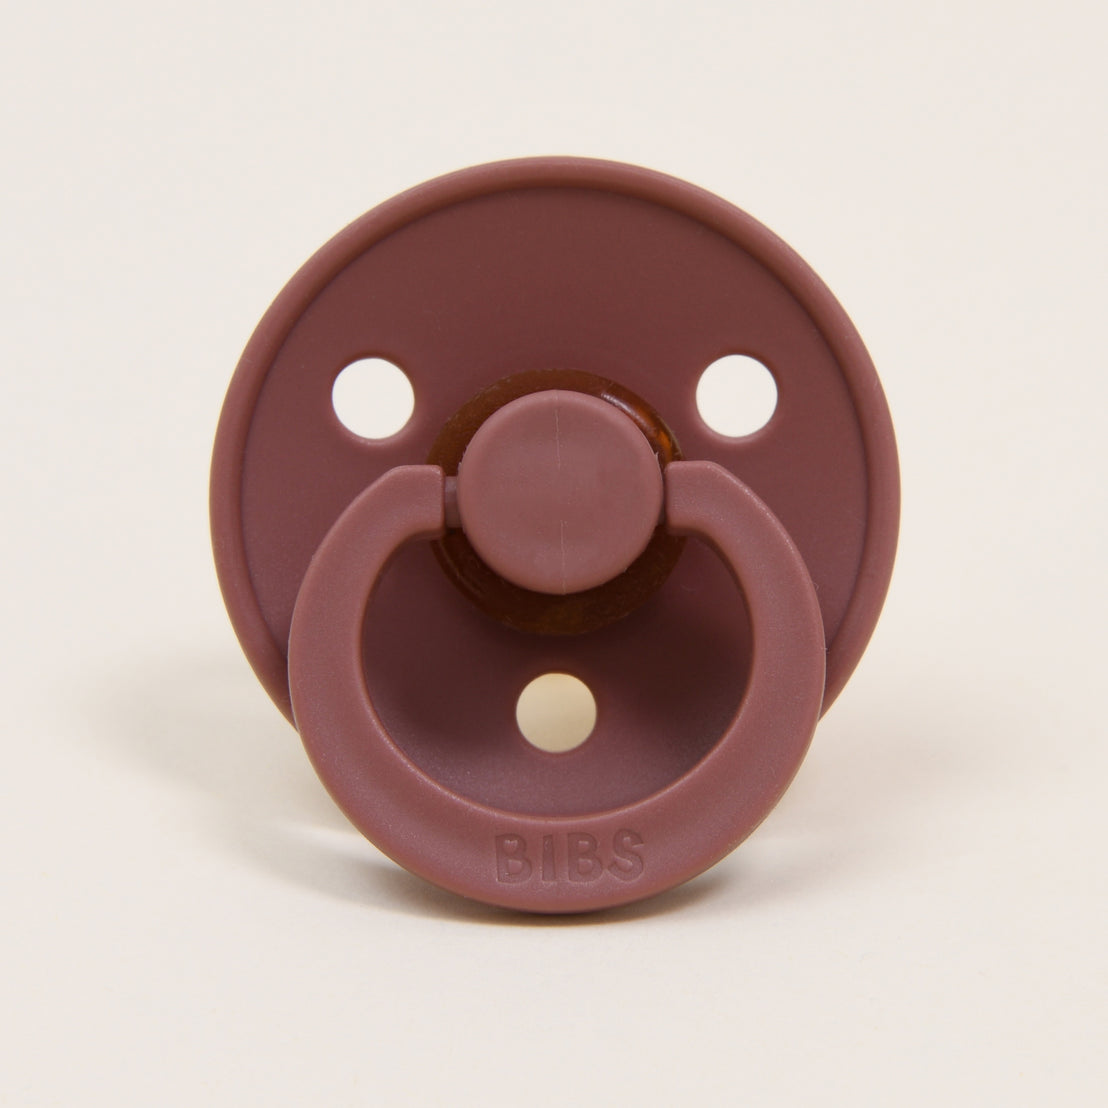 A close-up image of a Bibs Pacifier Set in Peach Sunset & Woodchuck, featuring a round natural nipple. The brand "bibs" is embossed at the top. This item makes an upscale baby gift.